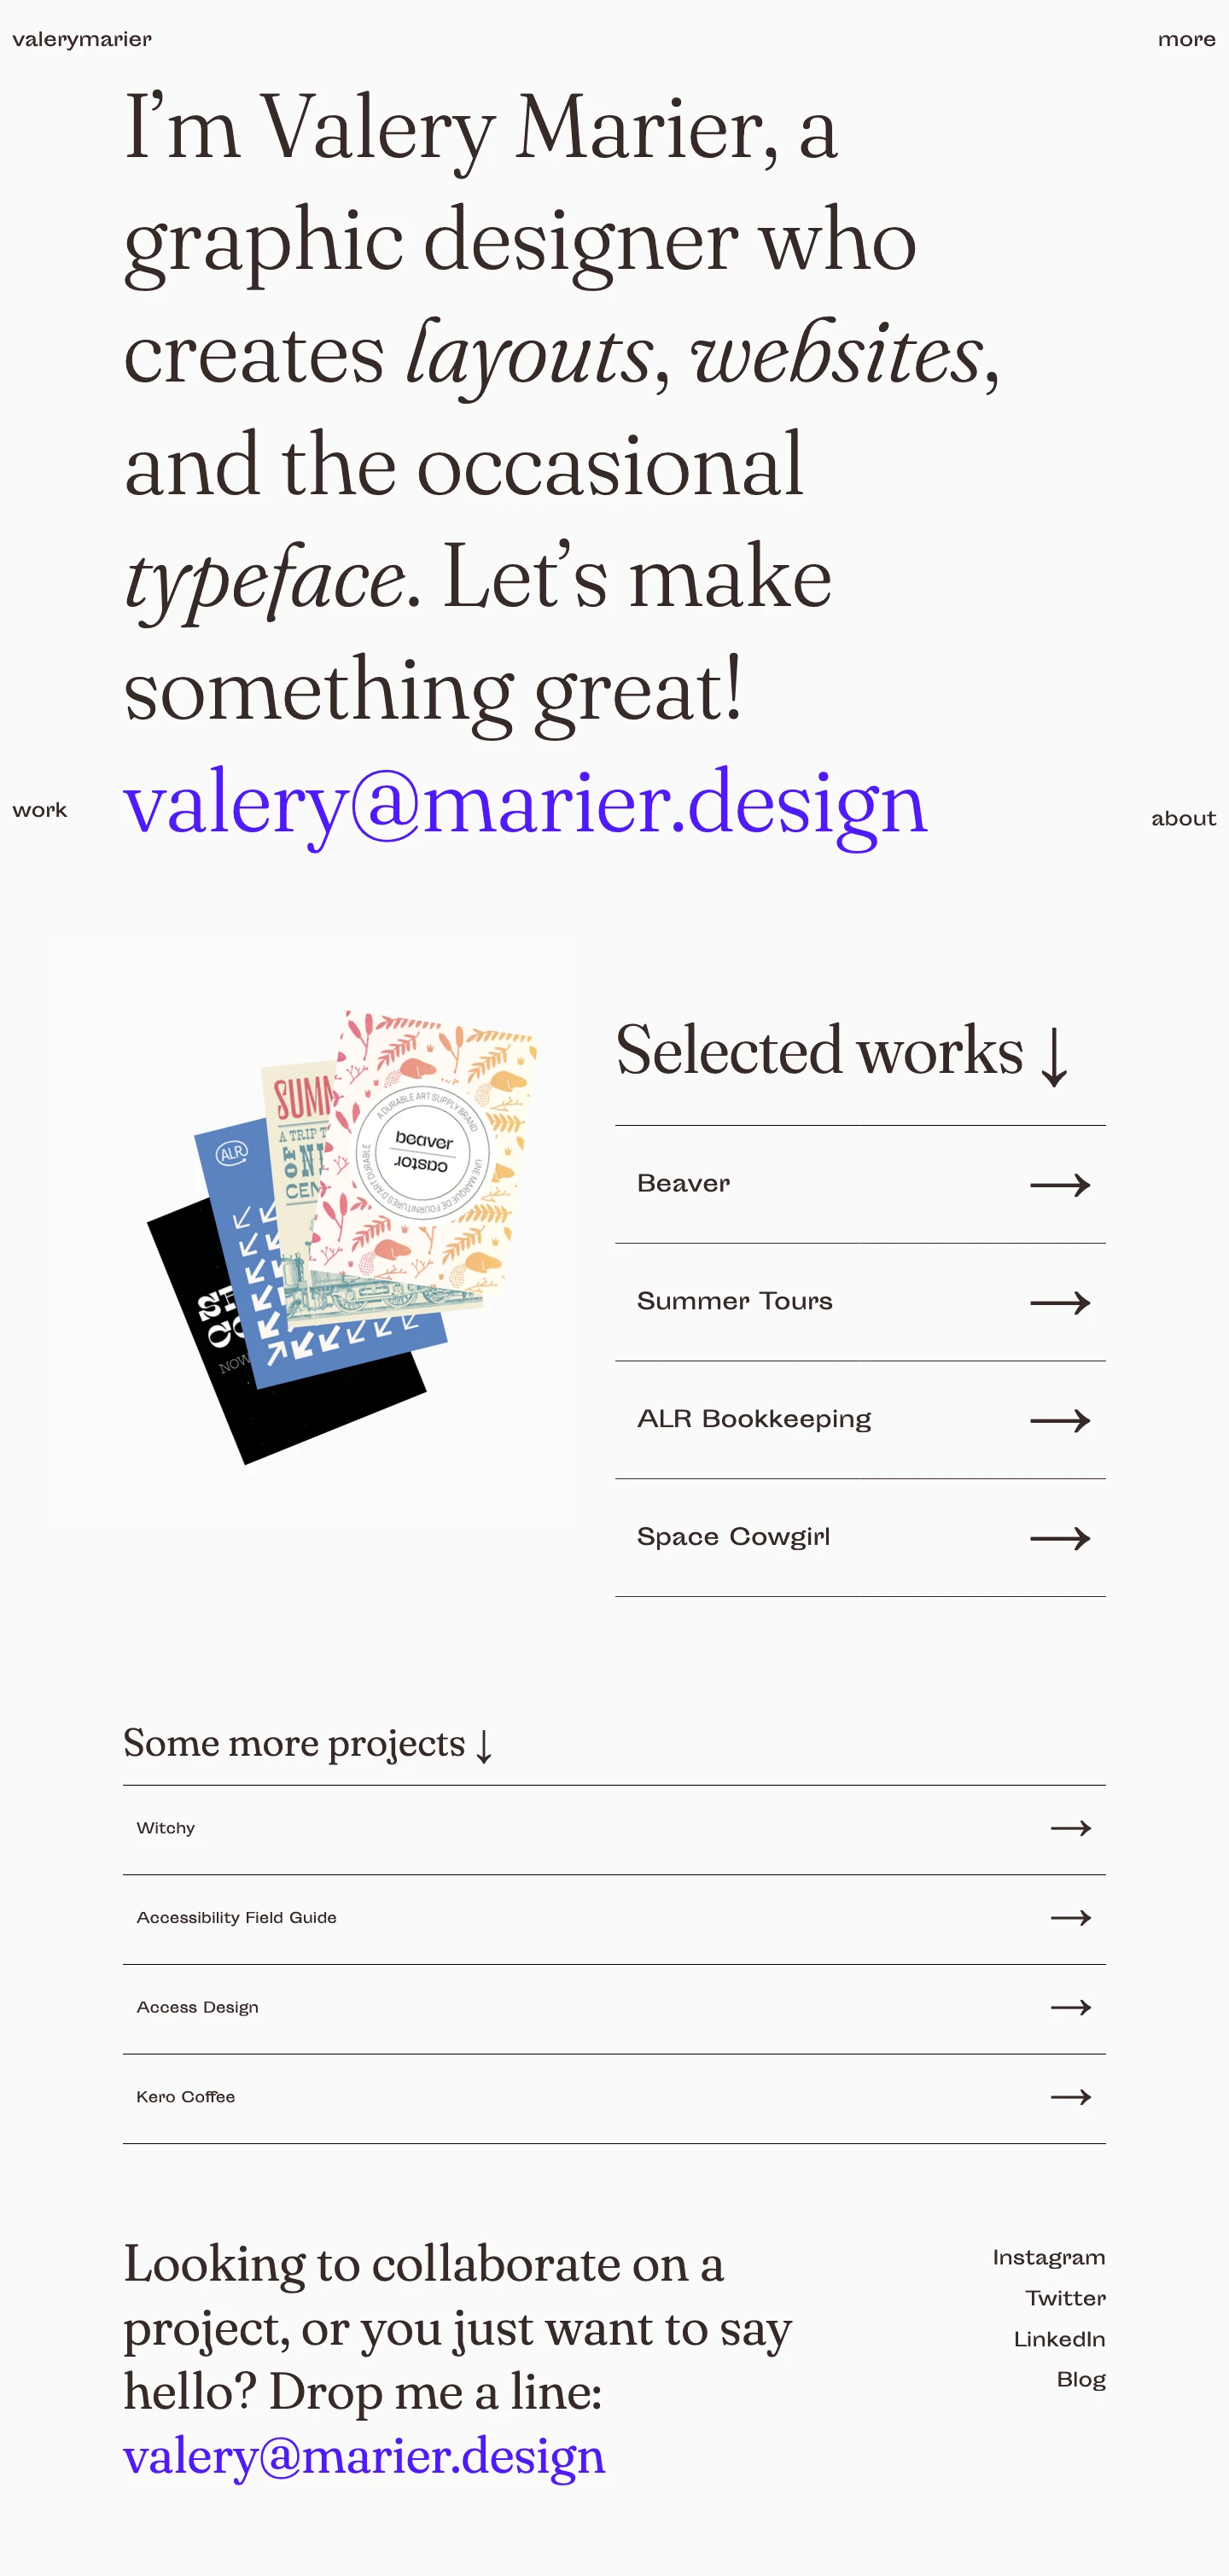 Valery Marier Landing Page Example: I’m Valery Marier, a graphic designer who creates layouts, websites, and the occasional typeface. Let’s make something great!